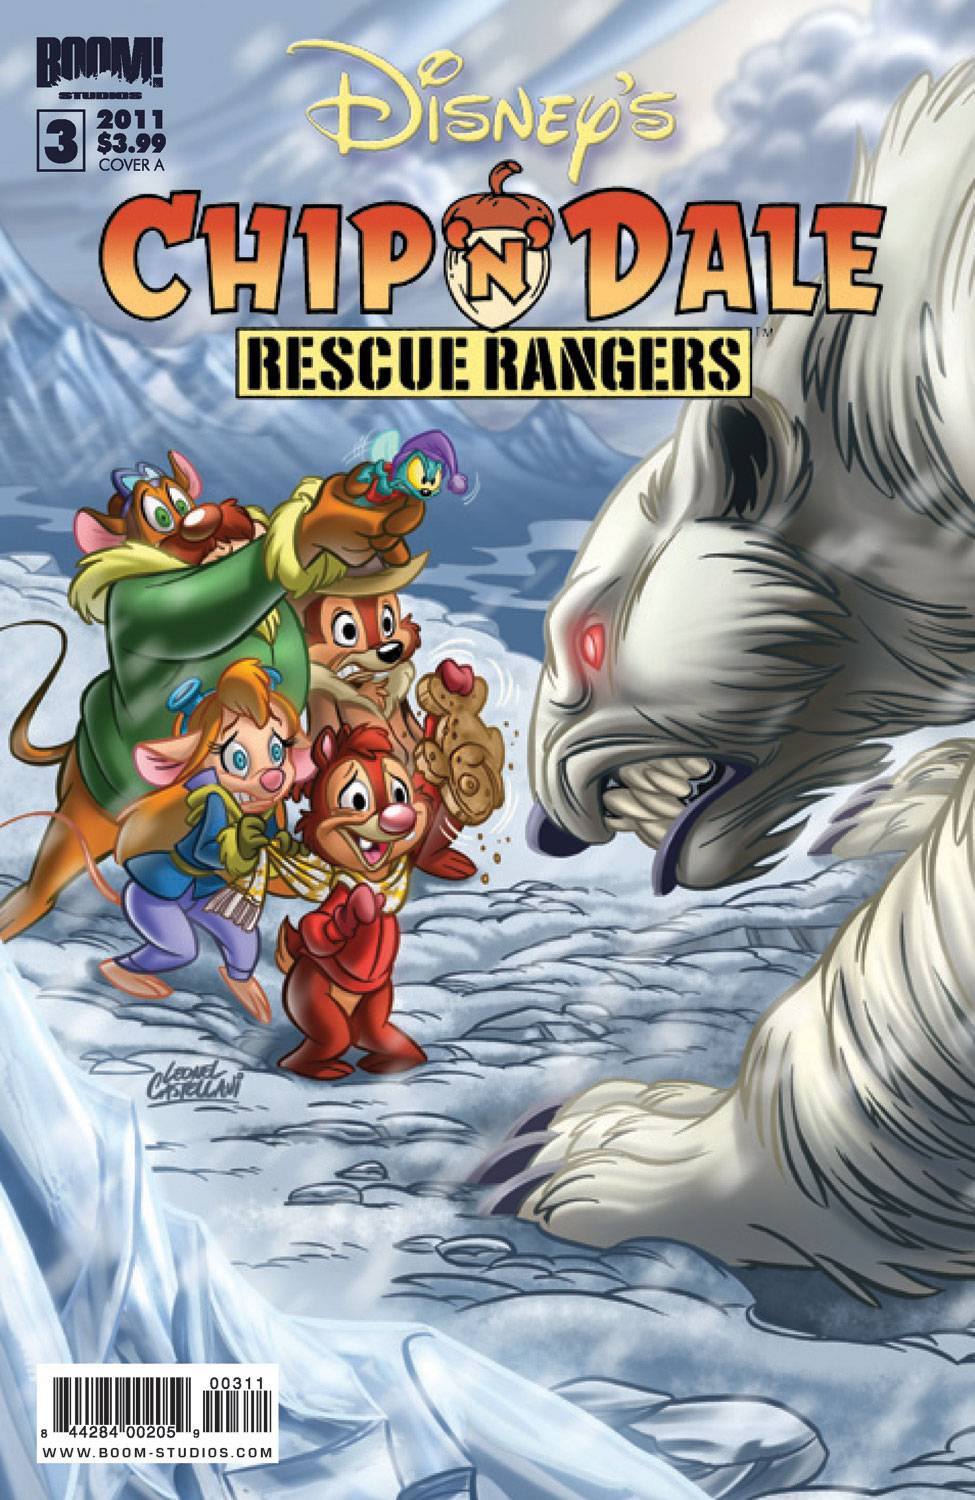 Chip and dale rescue rangers volume 3